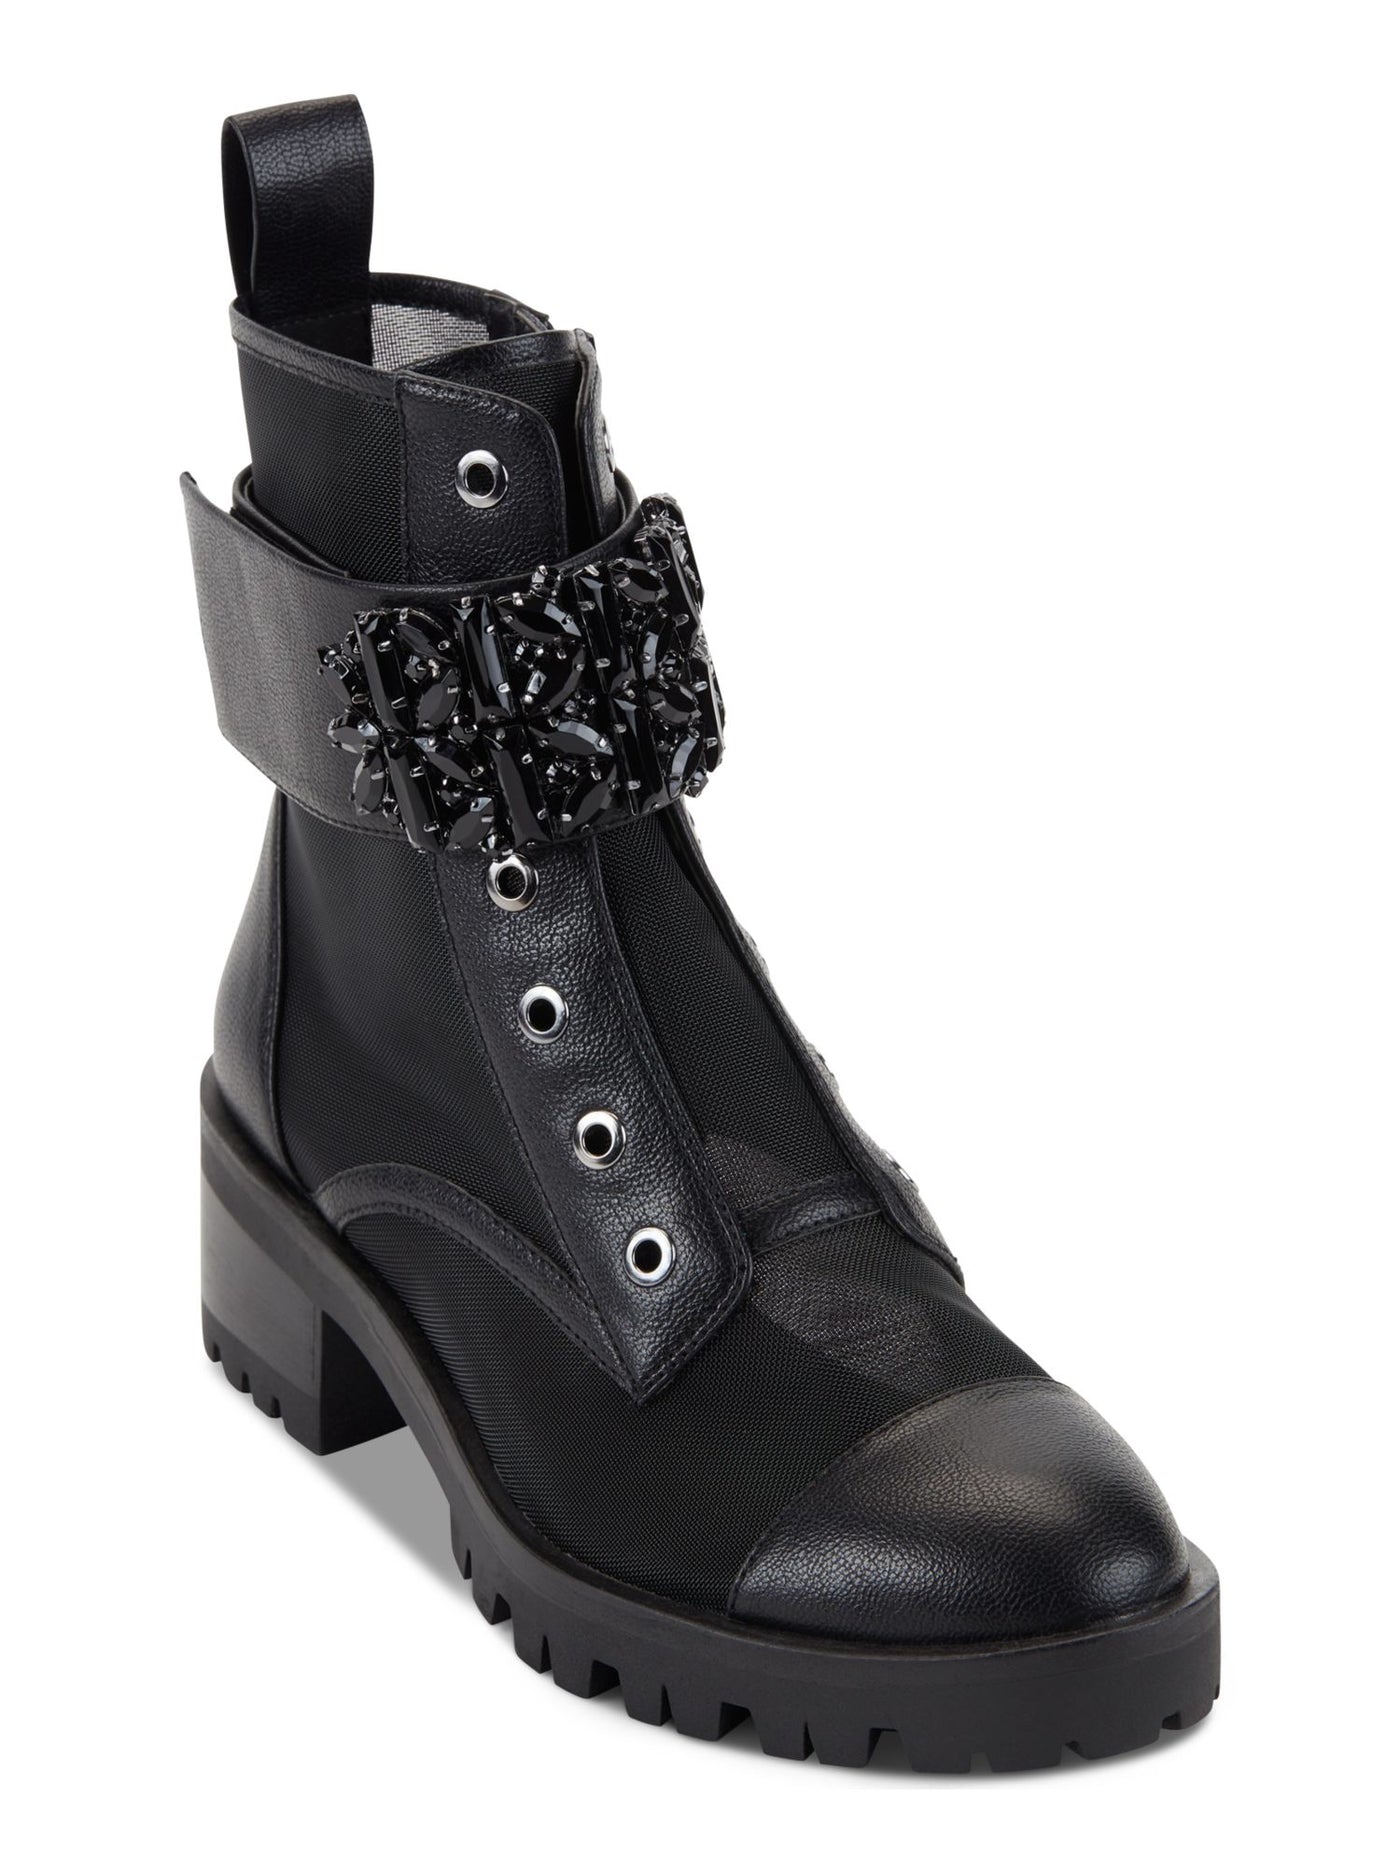 KARL LAGERFELD PARIS Womens Black Embellished Ankle Strap Eyelets Lug Sole Cushioned Pippa Round Toe Block Heel Zip-Up Combat Boots 9.5 M